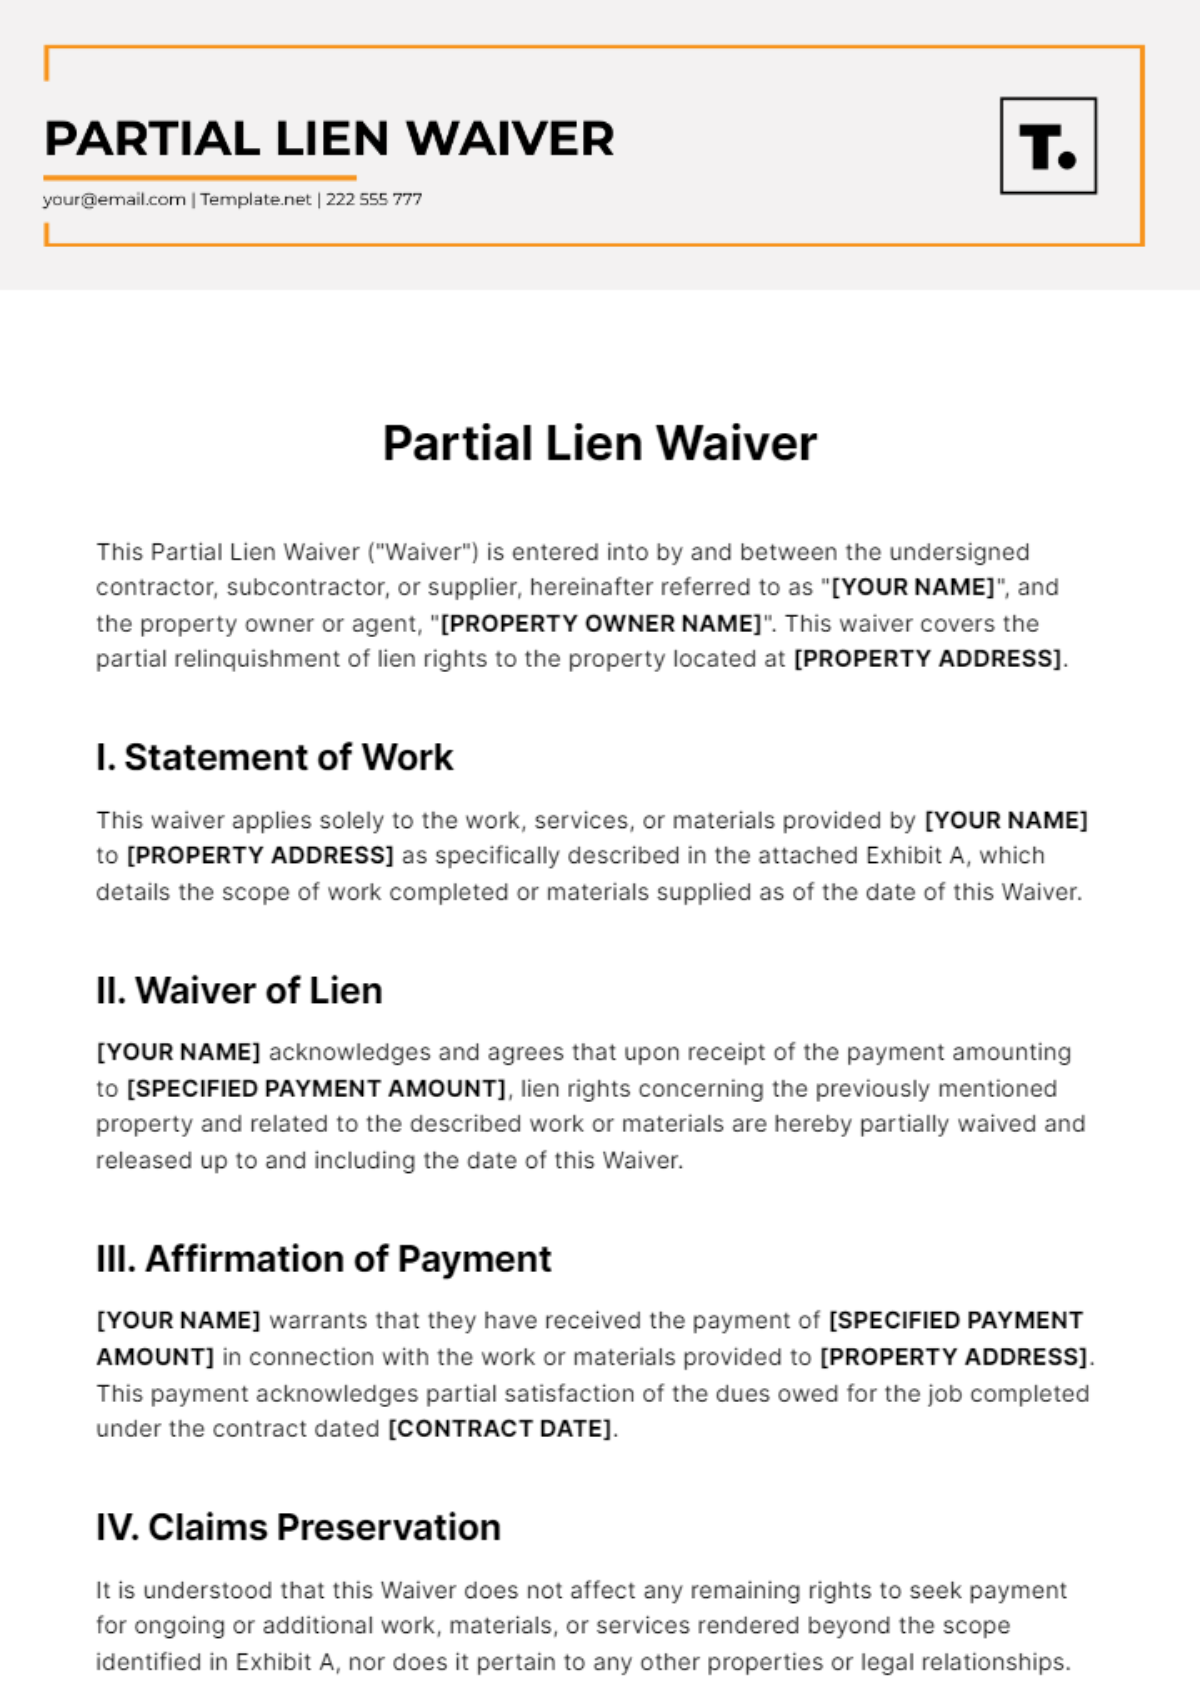 Free Partial Lien Waiver Template